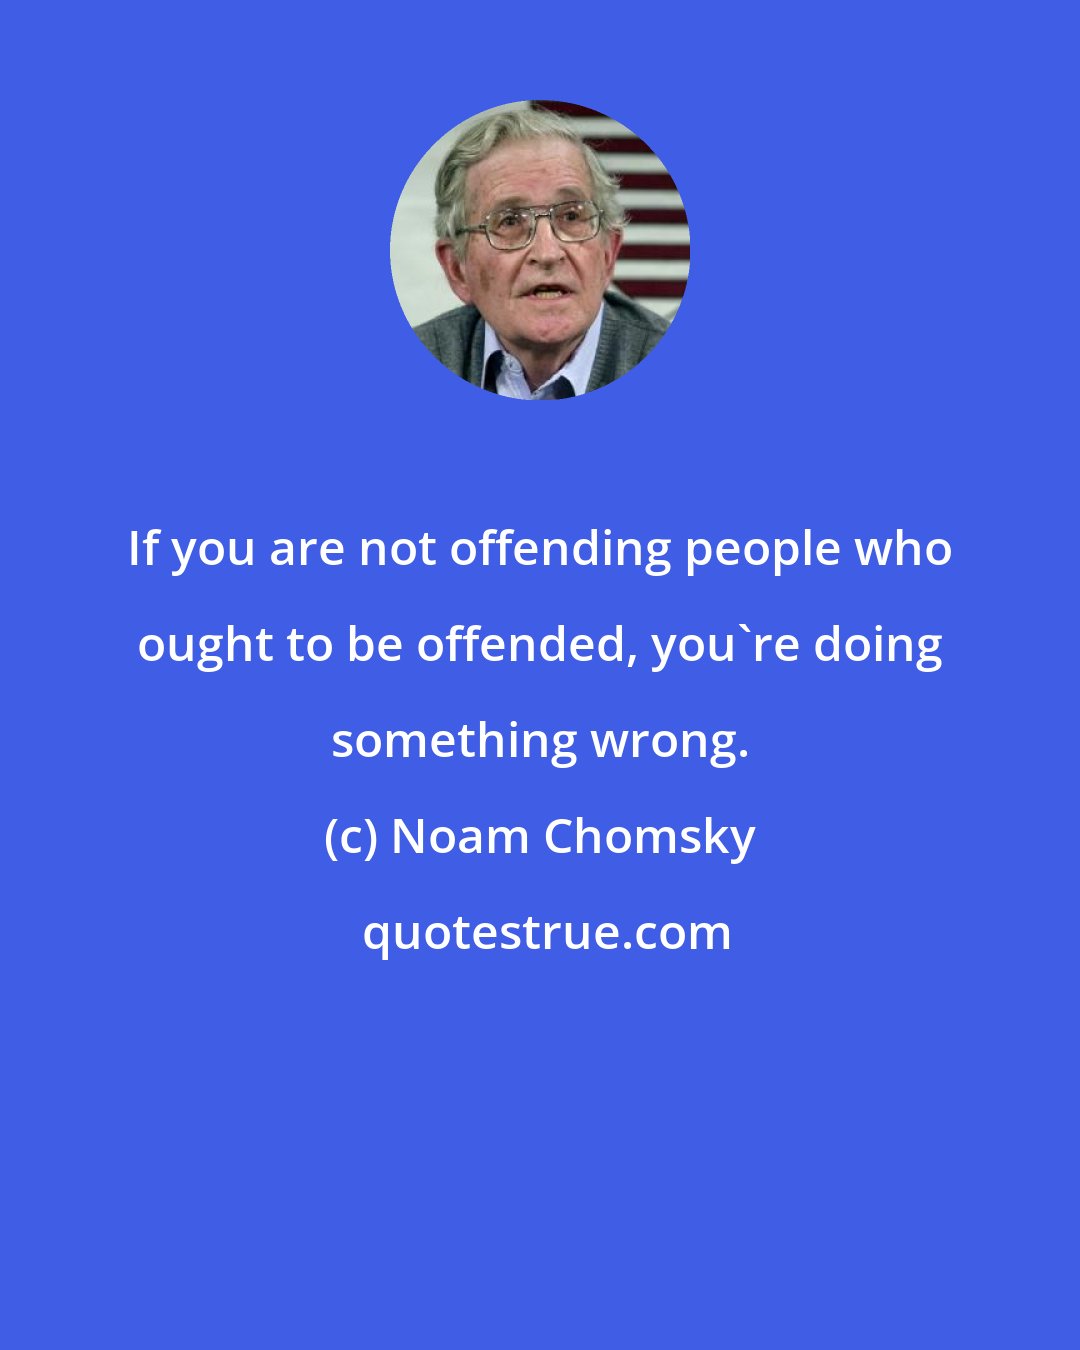 Noam Chomsky: If you are not offending people who ought to be offended, you're doing something wrong.